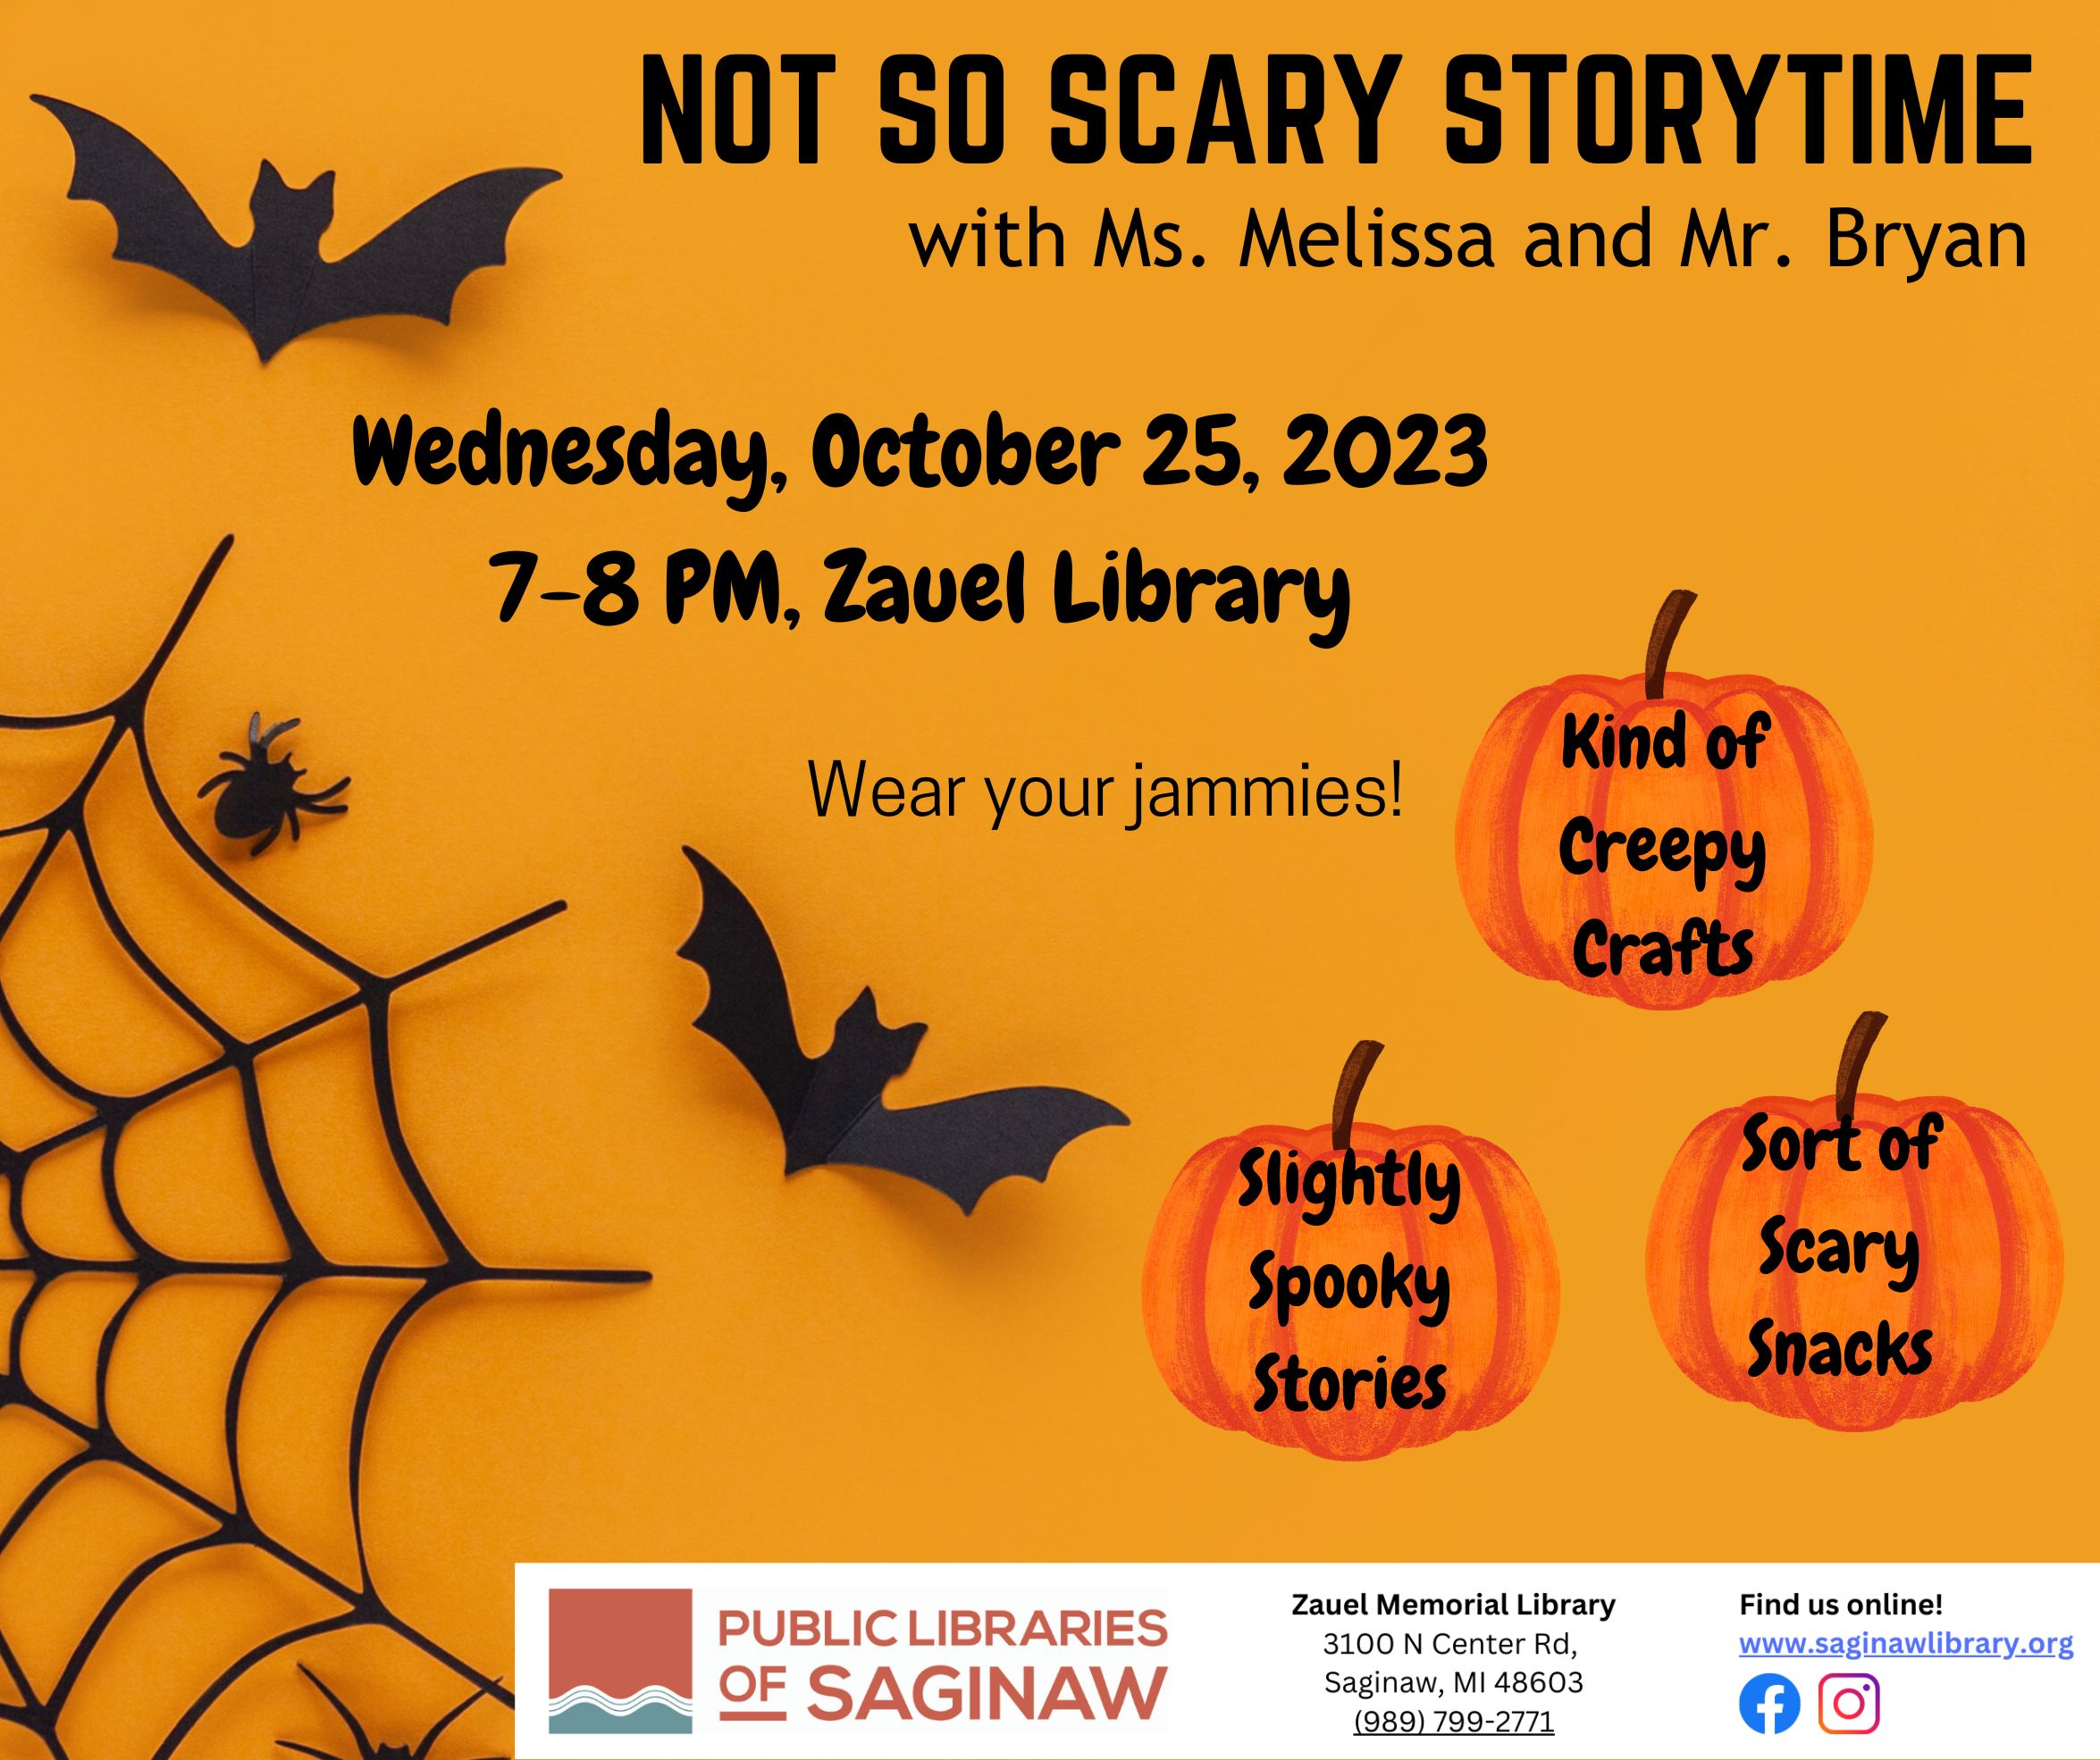 Flyer for the Not-so_Scary Storytime